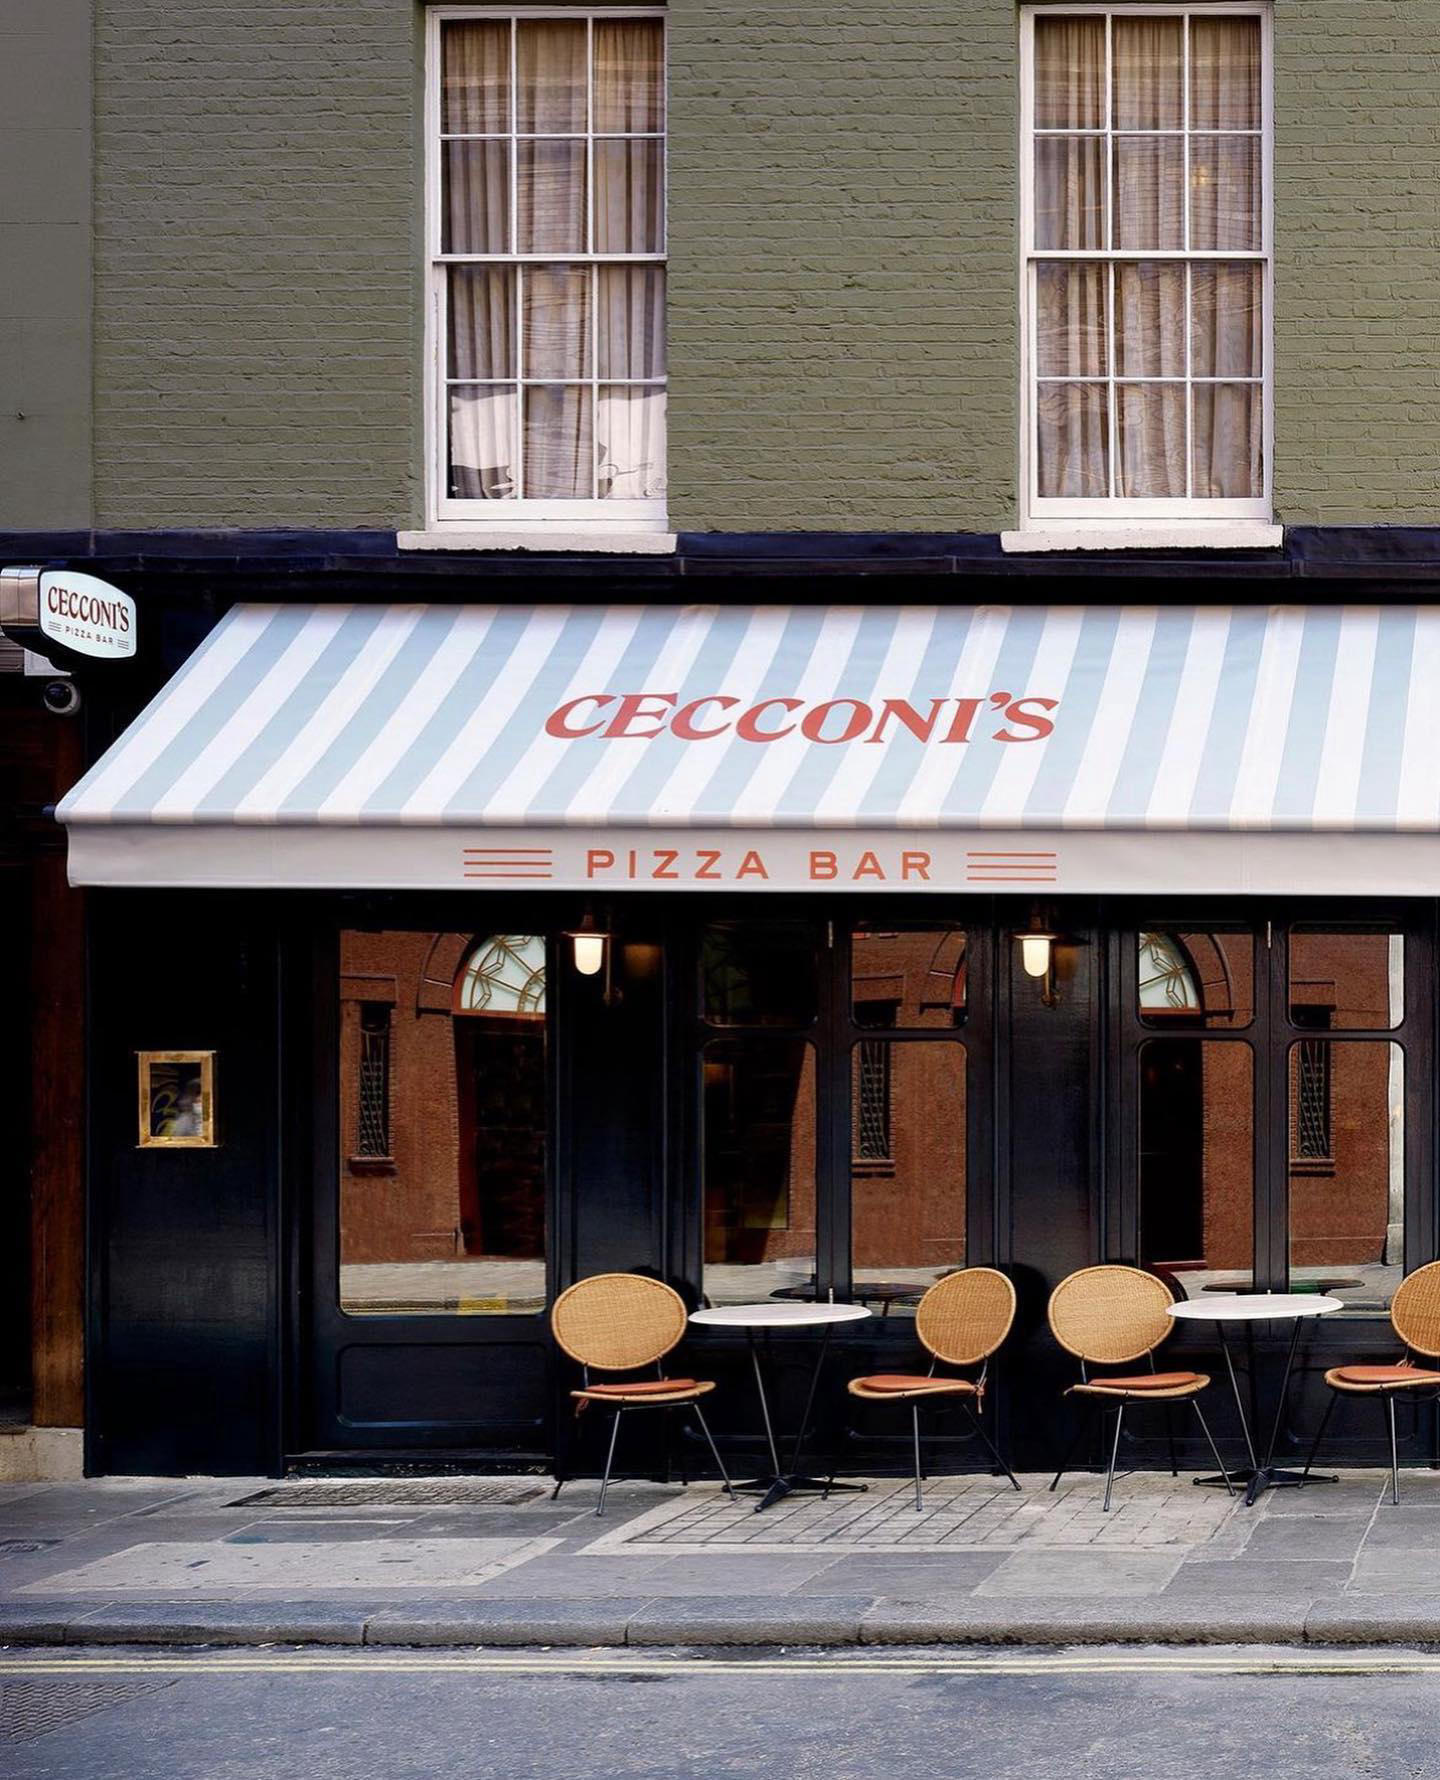 Pop by for pizza and pasta in the heart of Soho, London